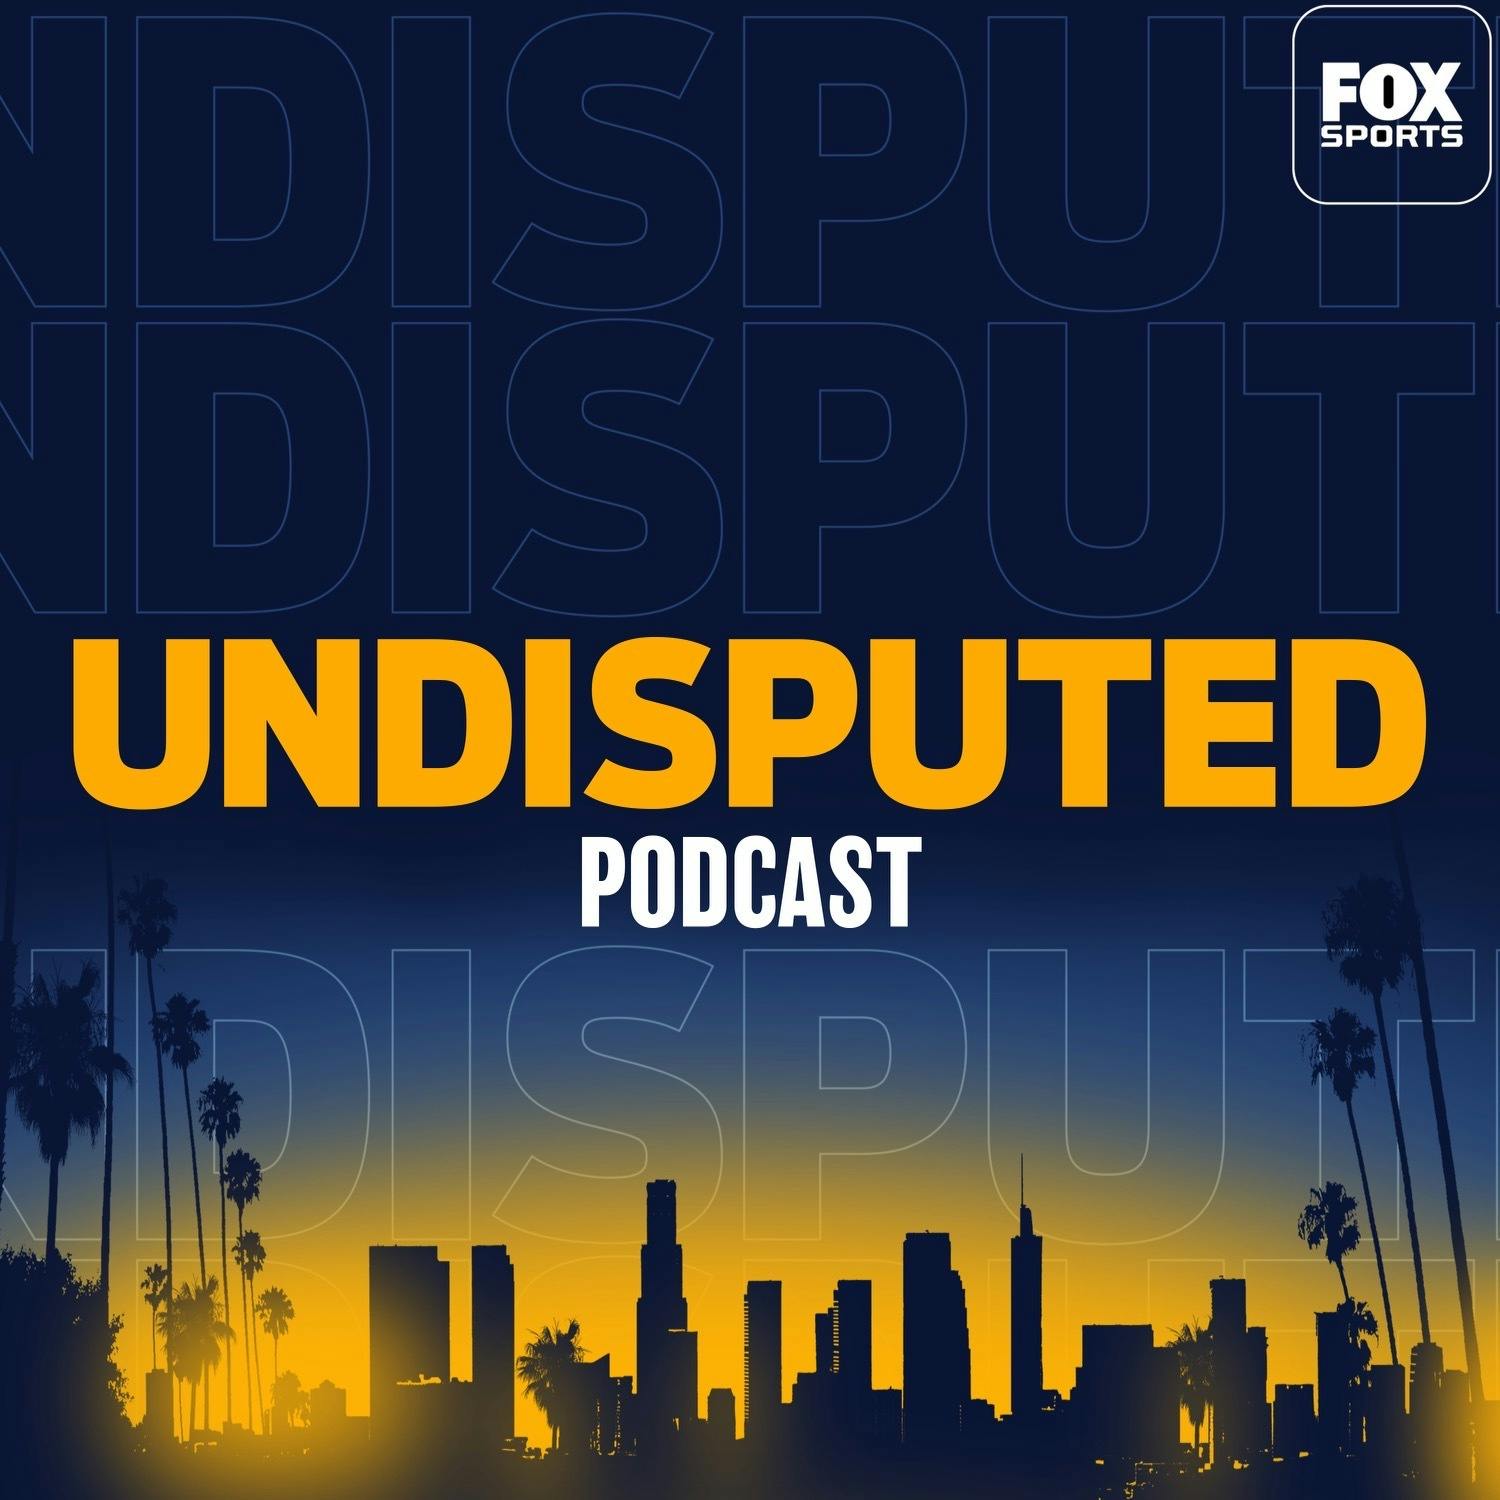 Undisputed podcast show image